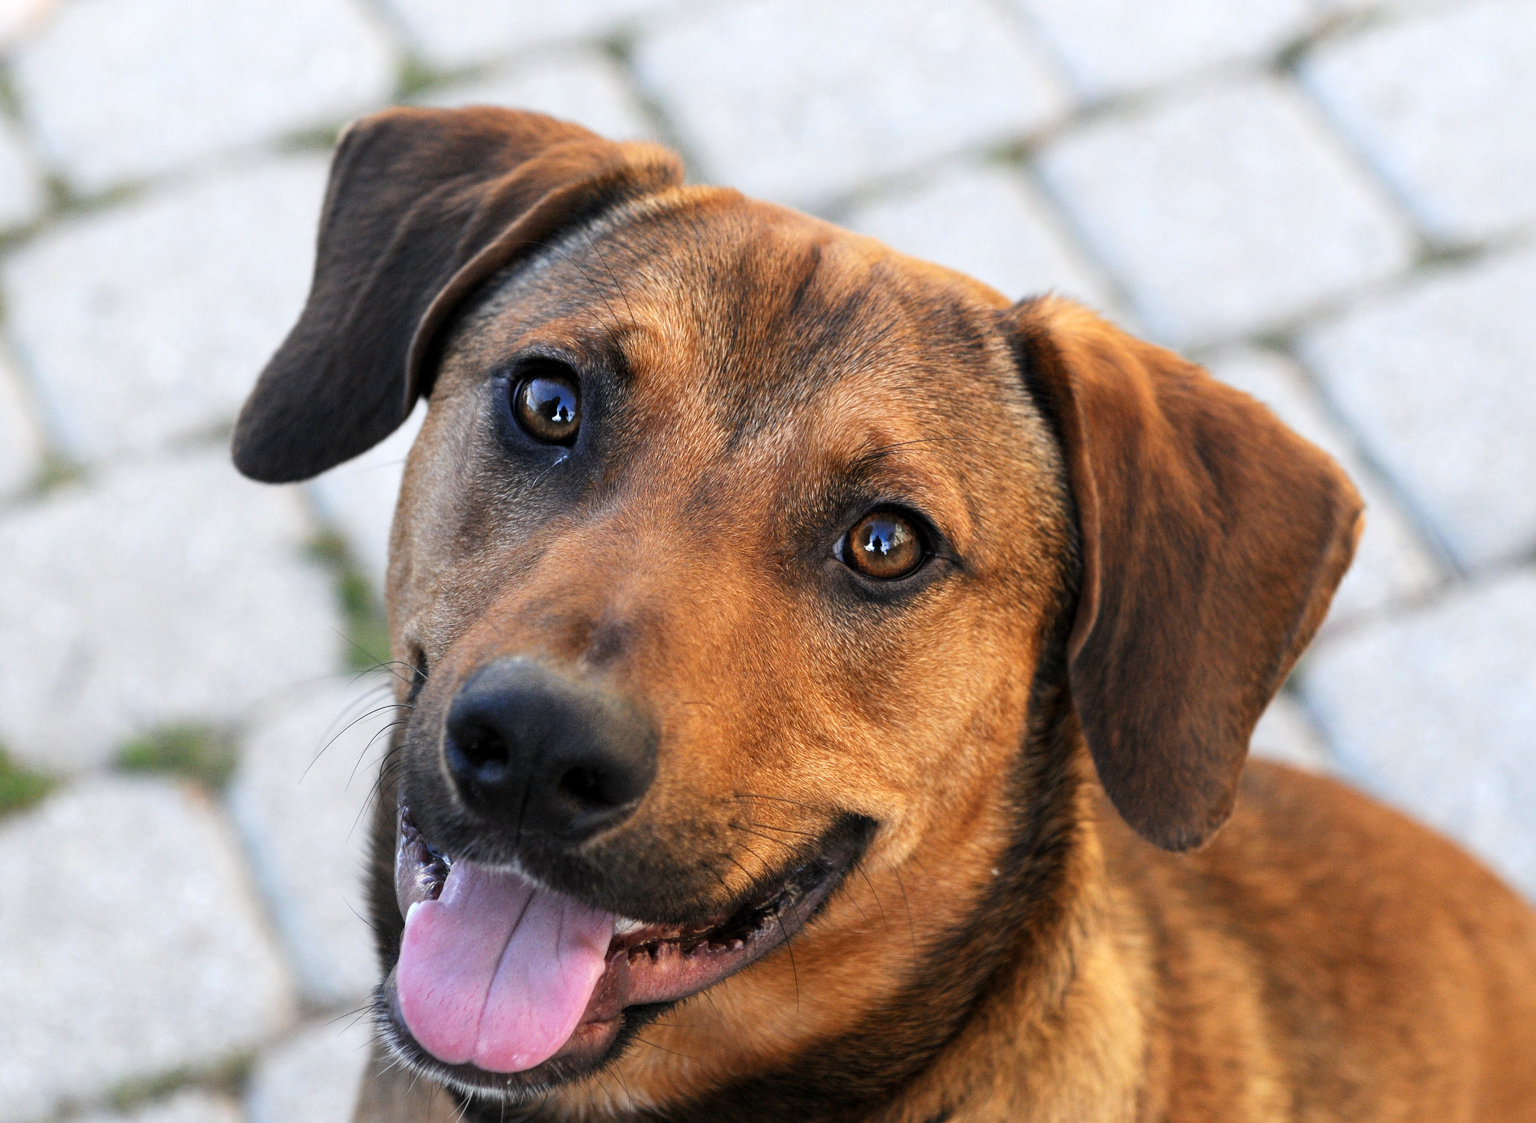 Meet Ollie, a 1-year-old hound mix from Alabama. This happy, exuberant boy loves life and wants to get the most out of every moment. (Courtesy Washington Animal Rescue League)